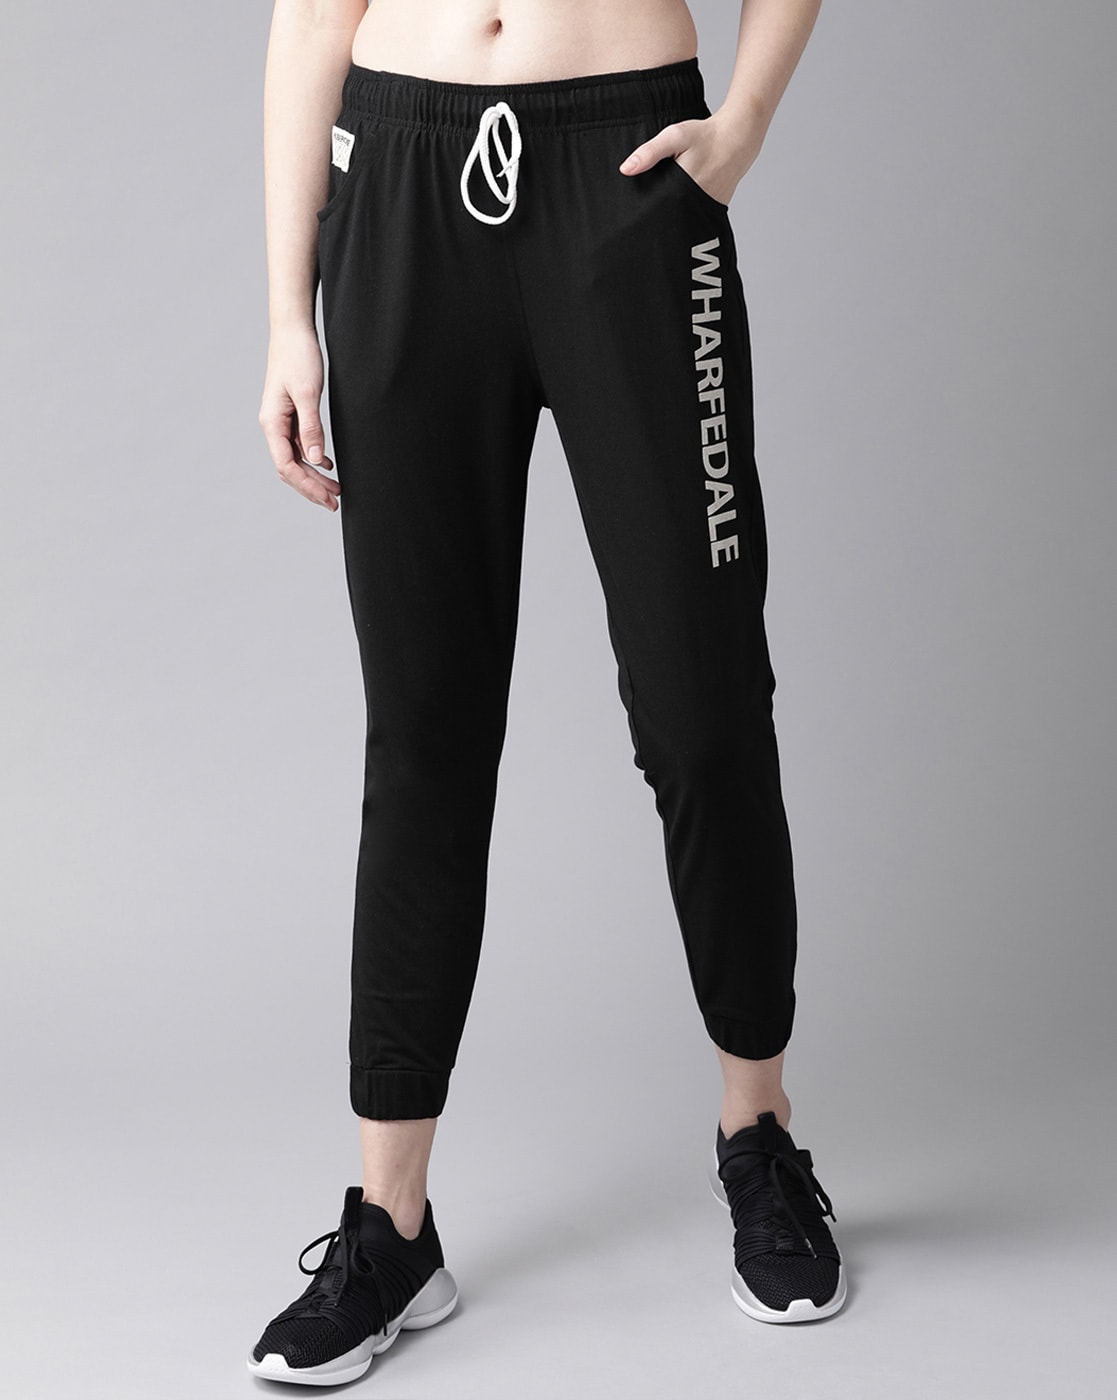 LIMITED EDITION LIFETHREADS WOMEN’S ACTIVE JOGGER PANT